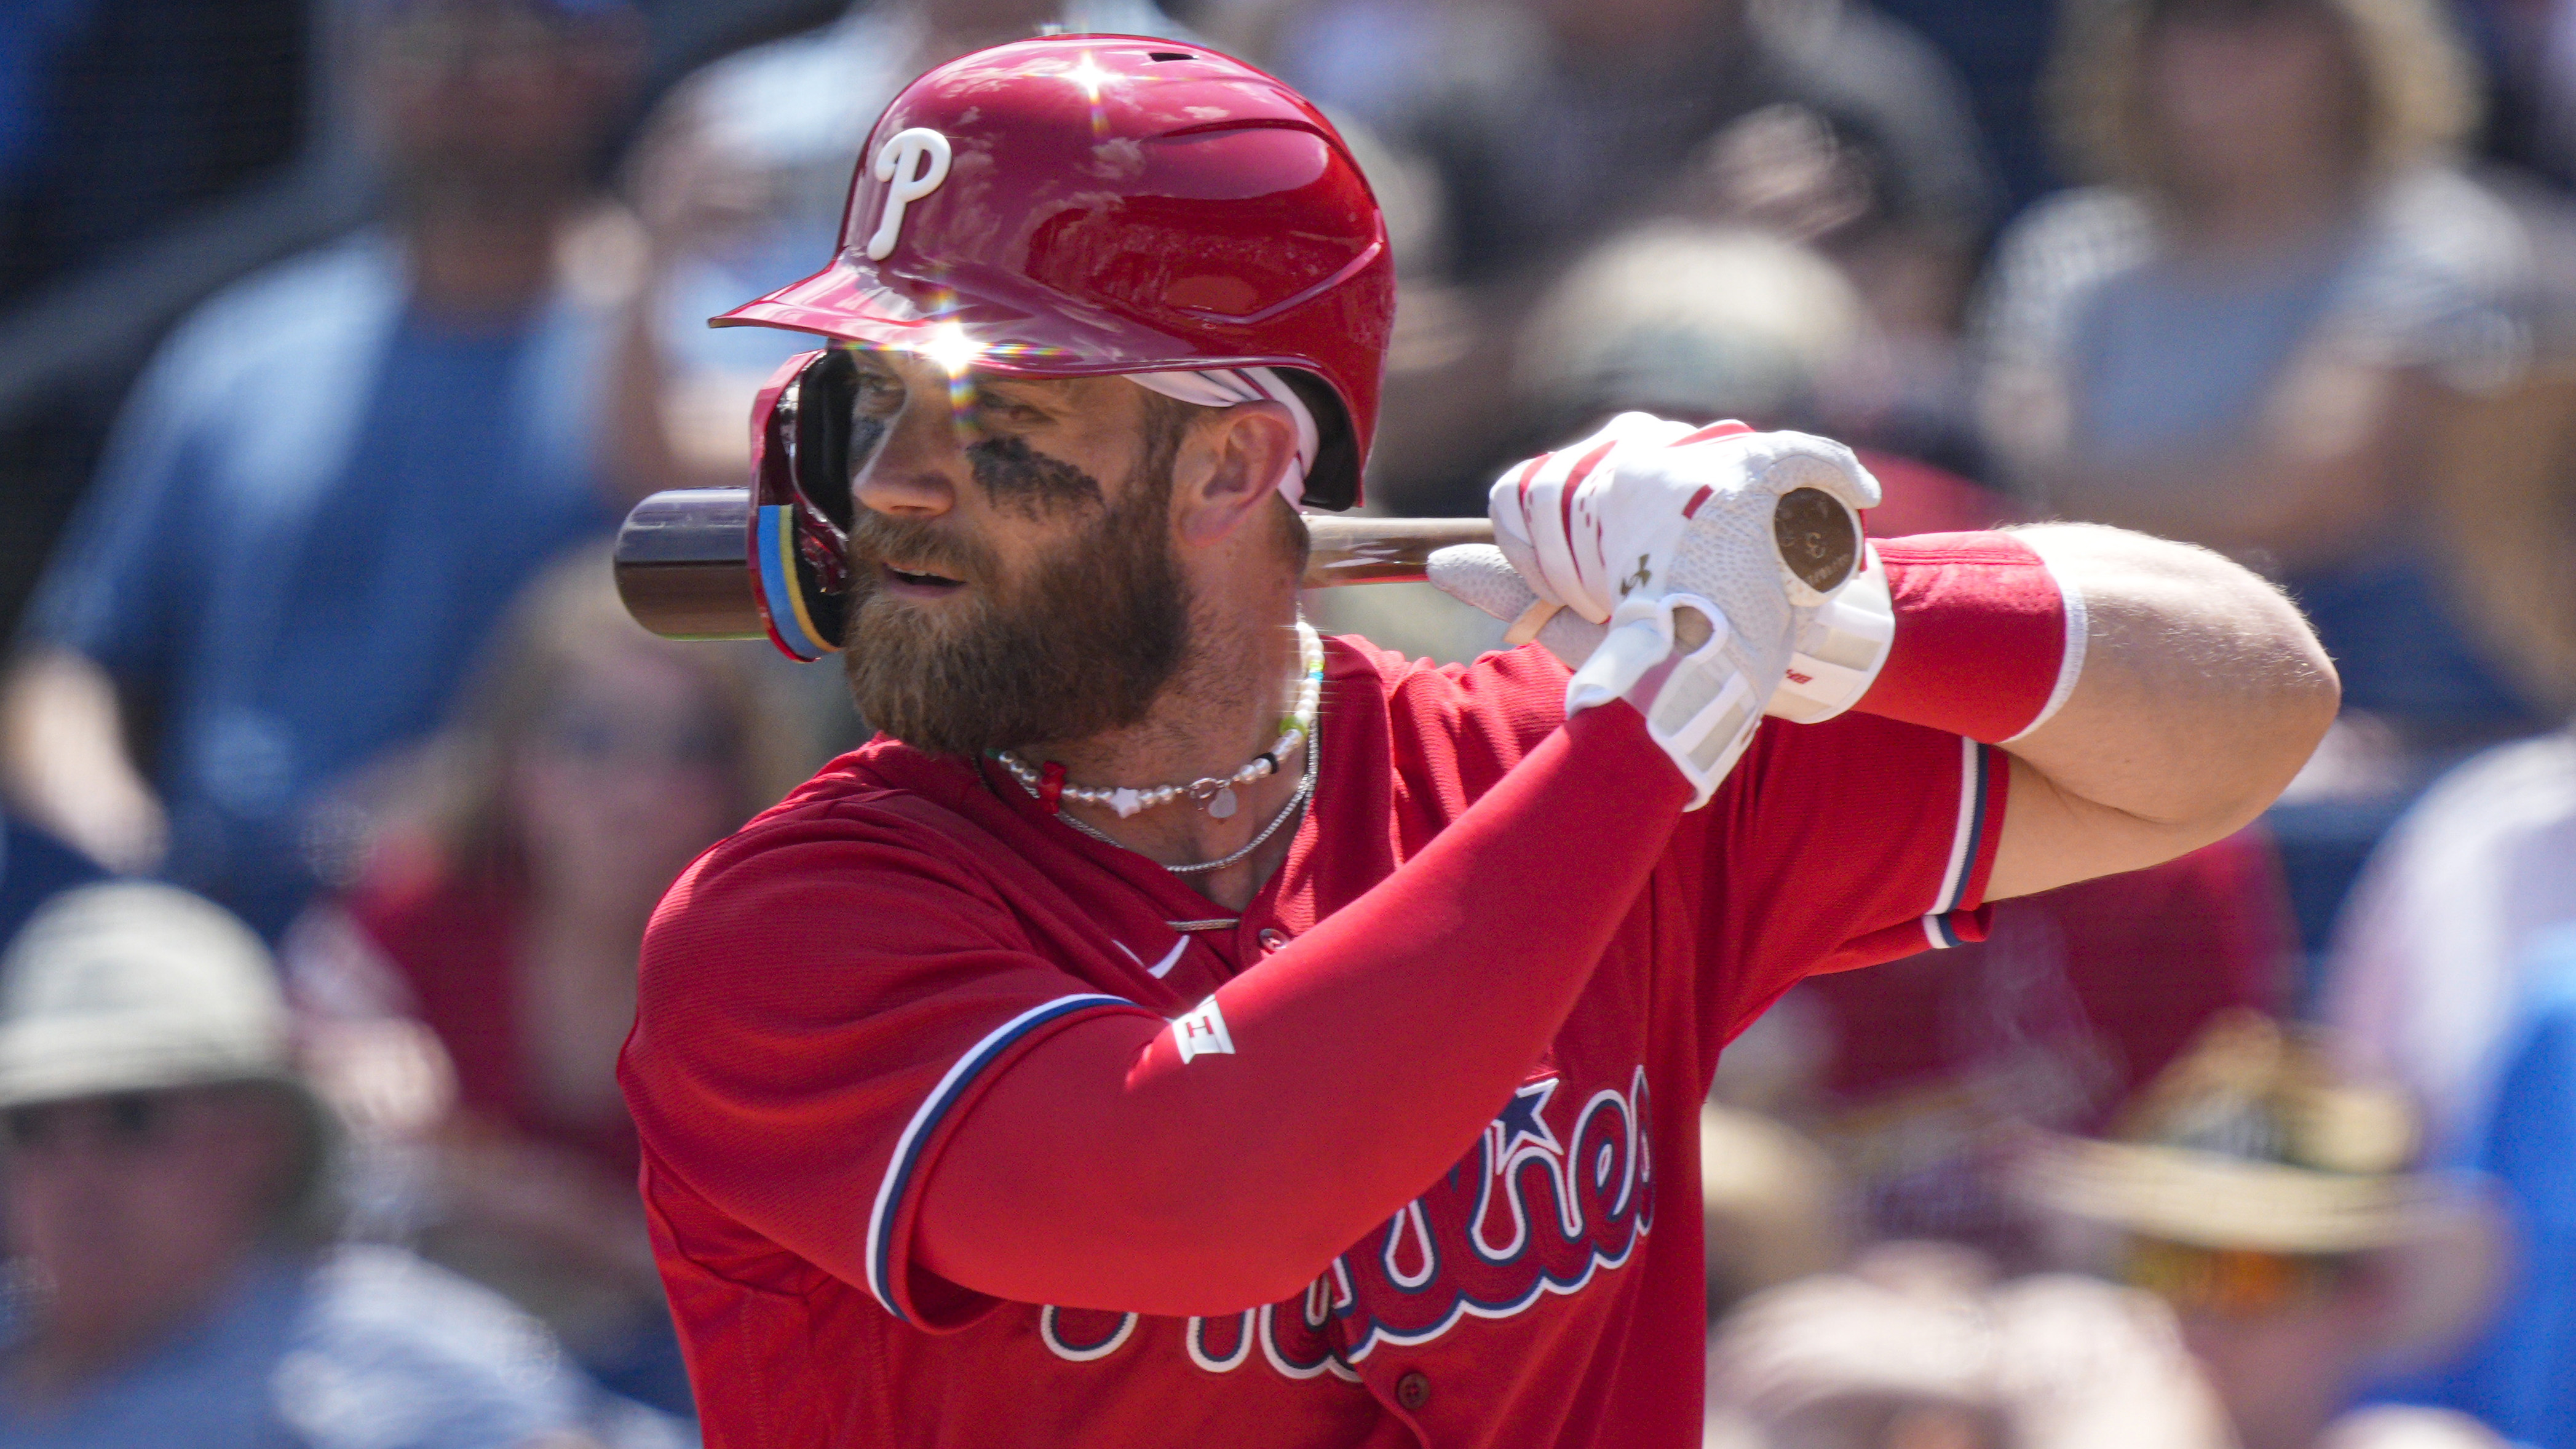 Bryce Harper takes the Philadelphia Phillies back to the World